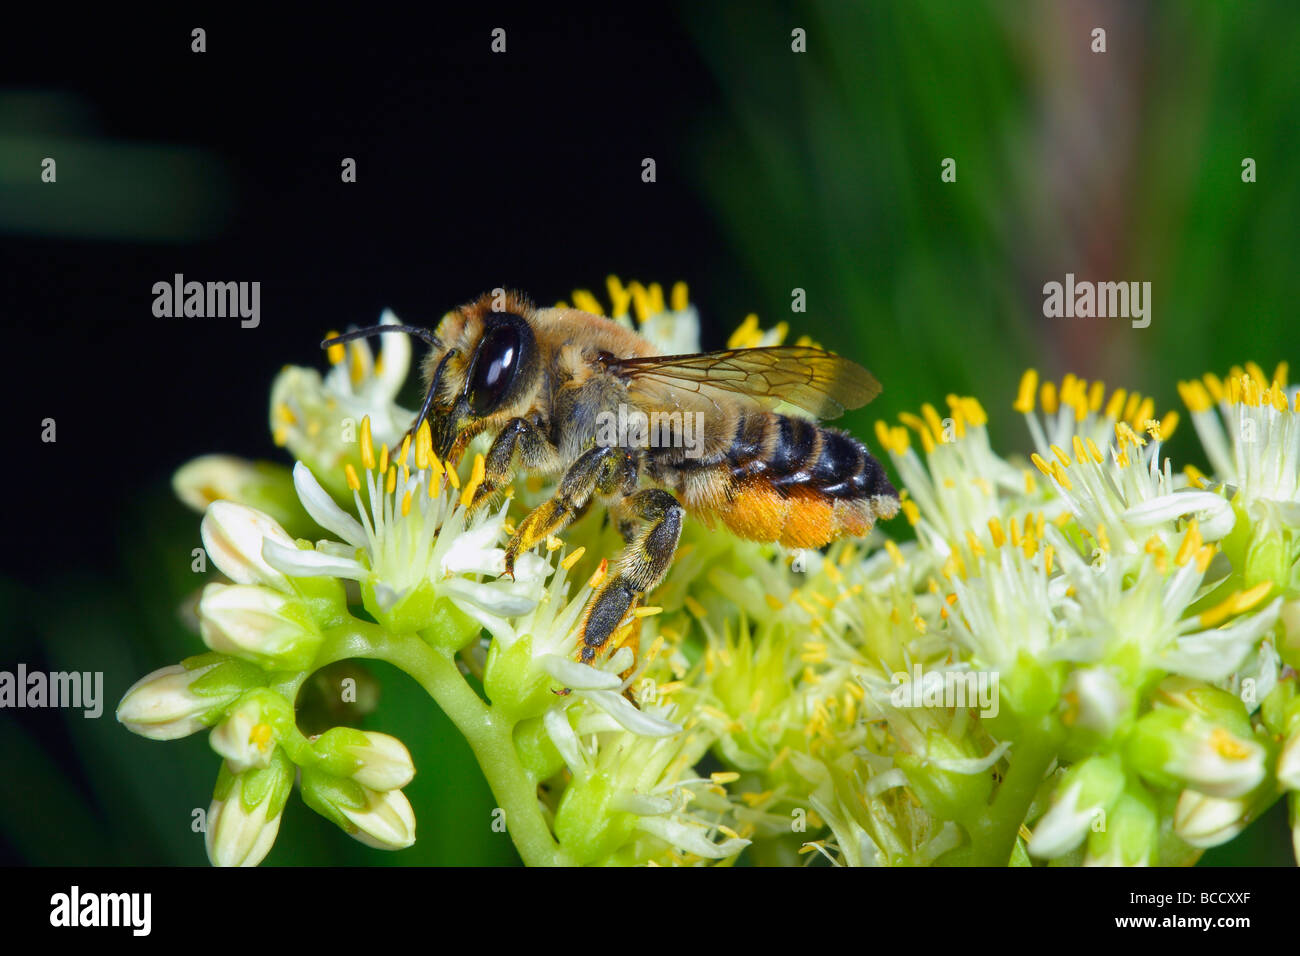 Leaf-cutter Bee, Megachile sp. Collecting nectar on flower Stock Photo